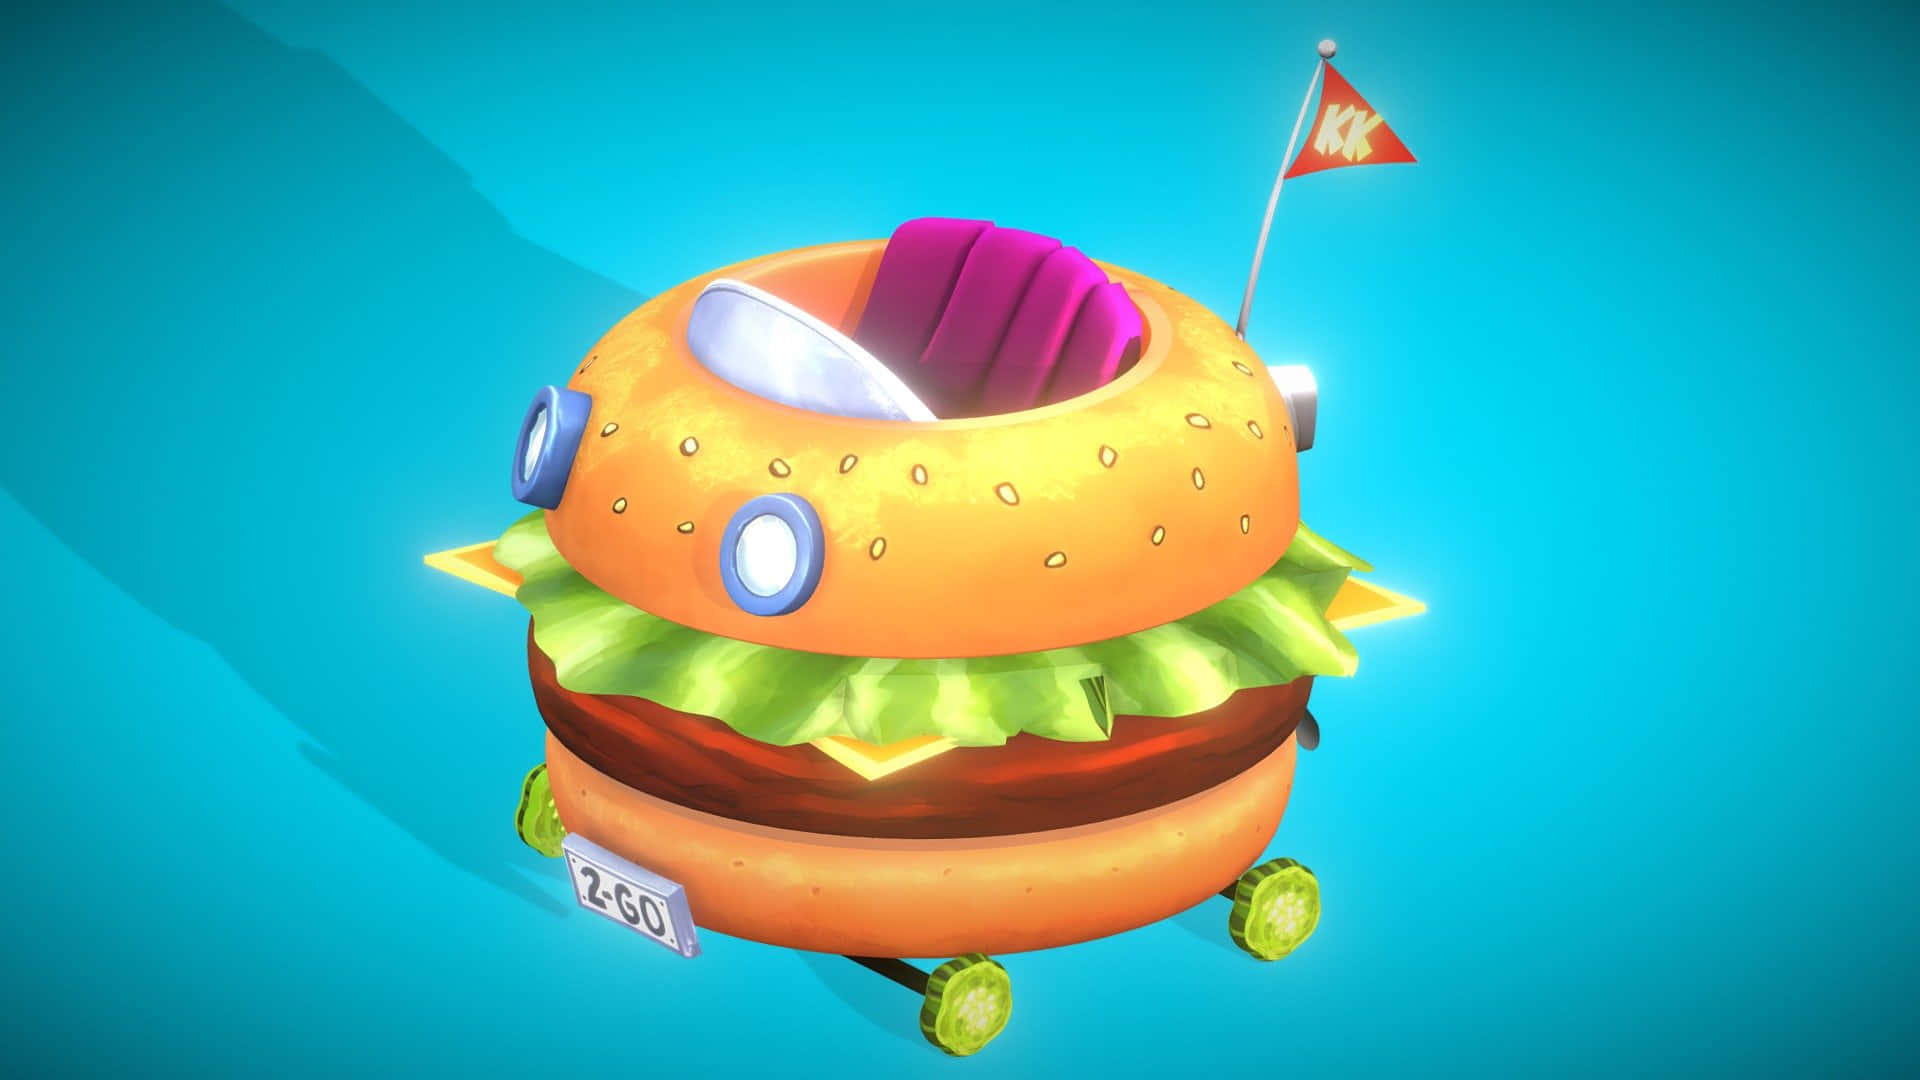 Delicious Krabby Patty on a plate Wallpaper